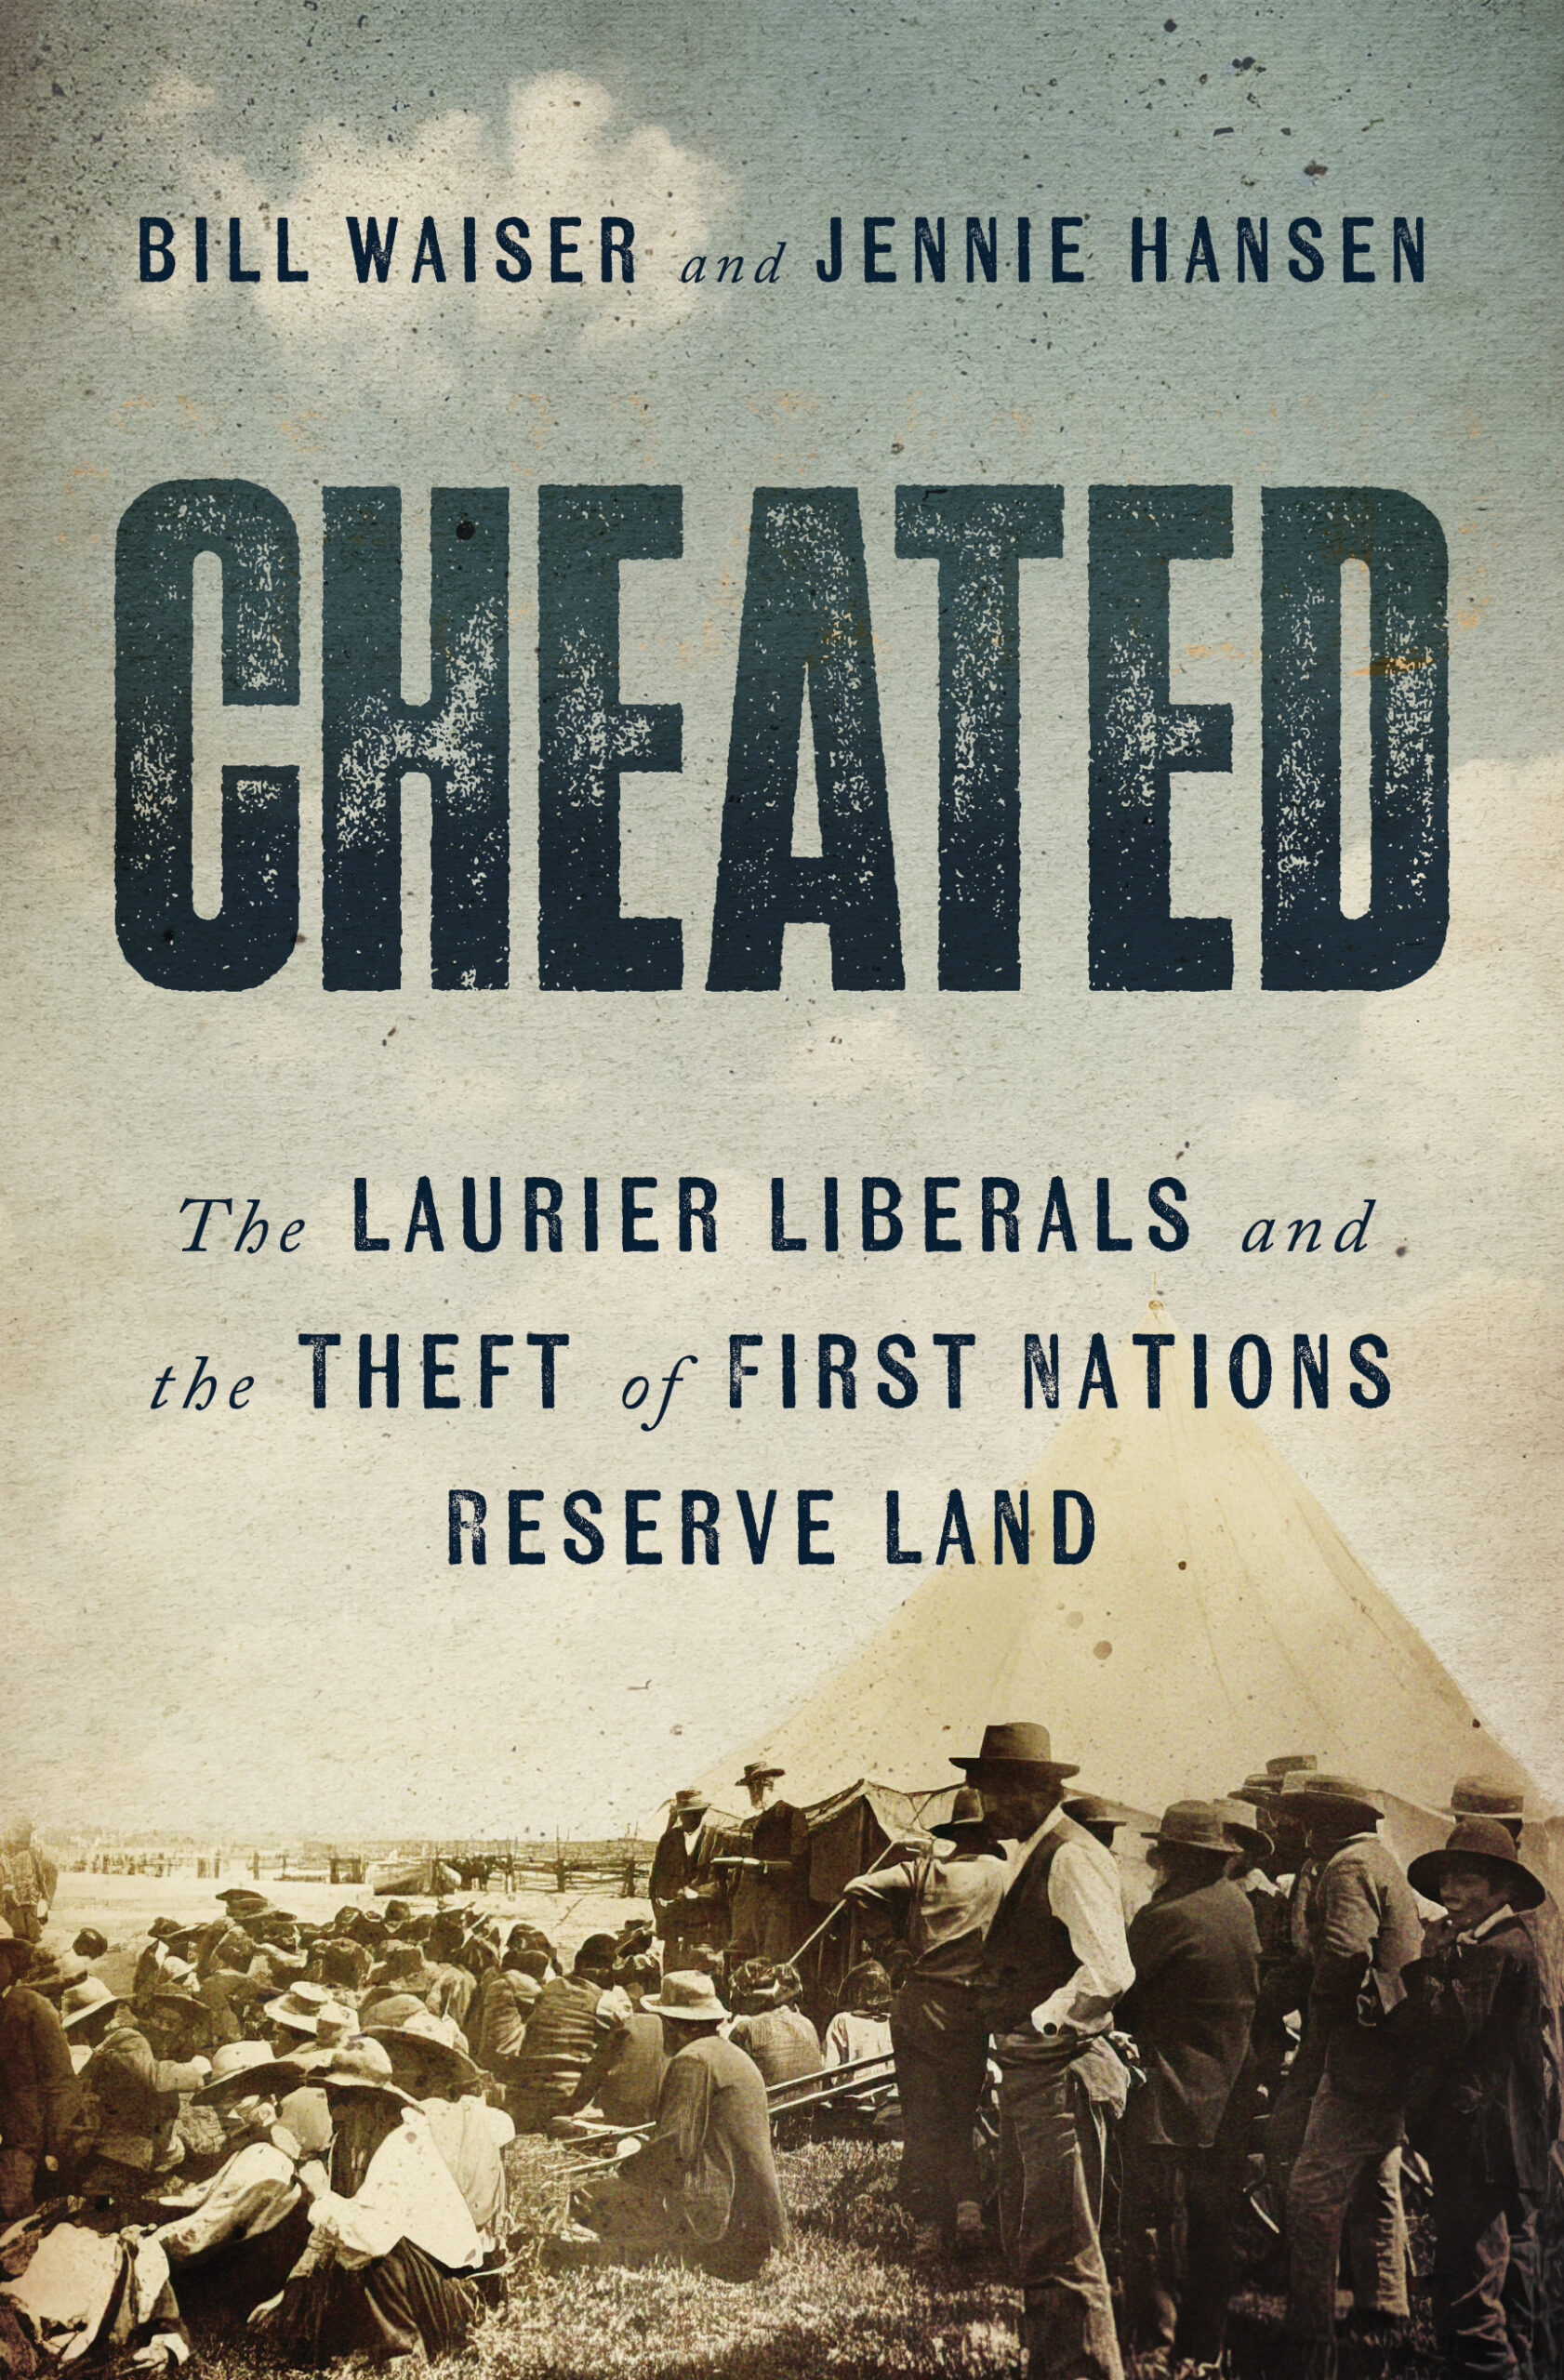 Cheated - The Laurier Liberals and the Theft of First Nations Reserve Land